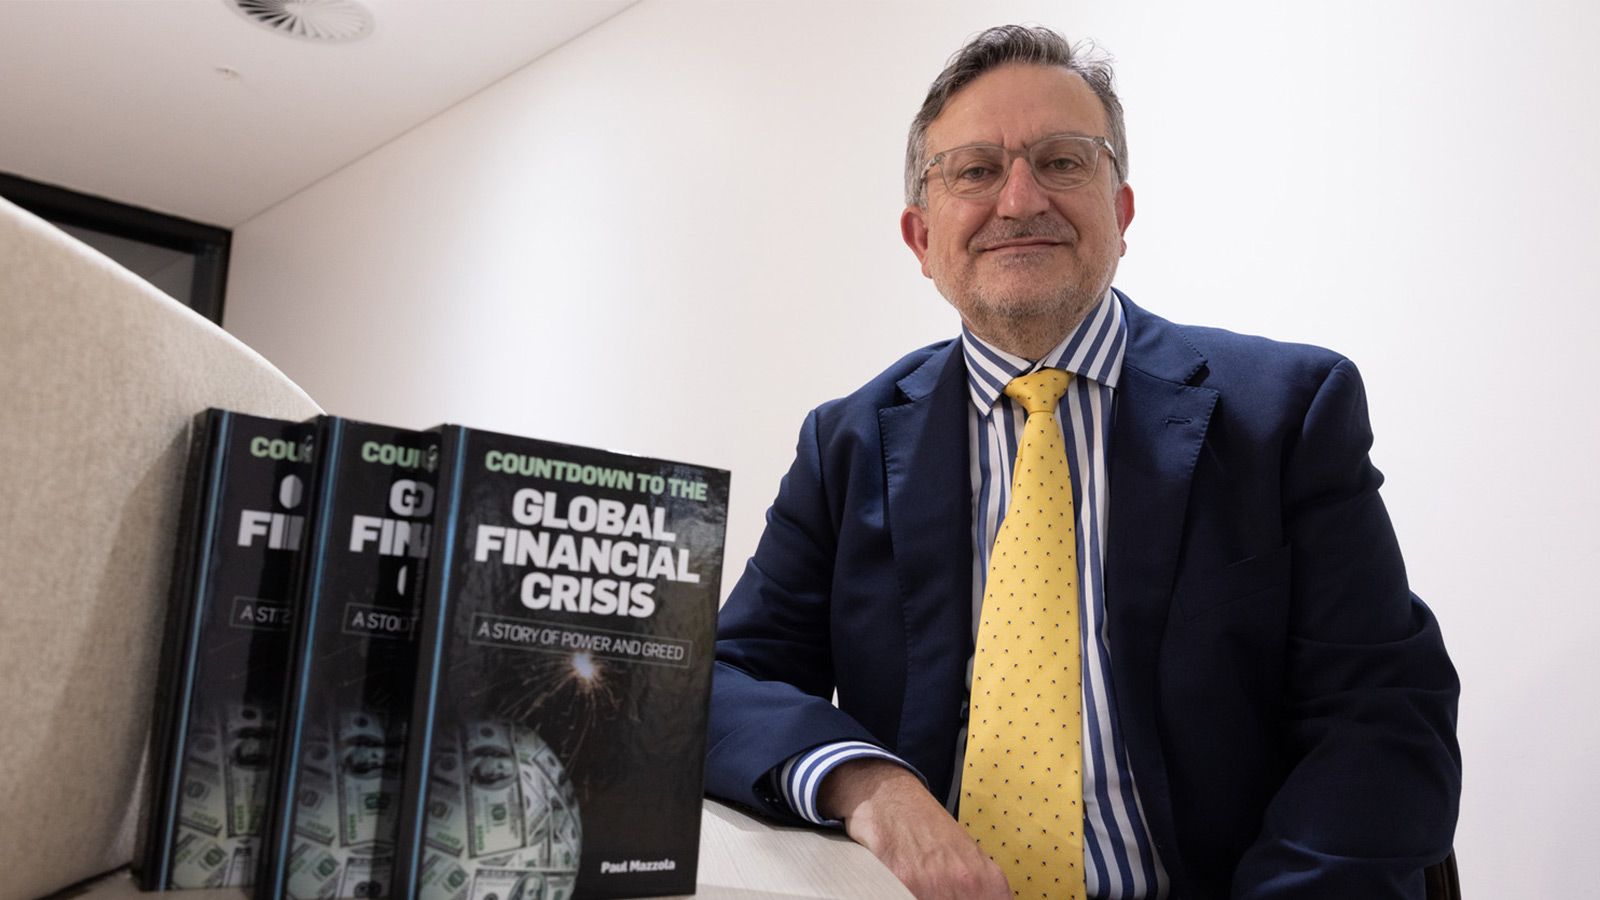 Paul Mazzola is Paul Mazzola is wearing a navy blue suit and yellow tie. He is sitting at a desk next to standing copies of a book titled ‘Countdown to the Global Financial Crisis’.wearing